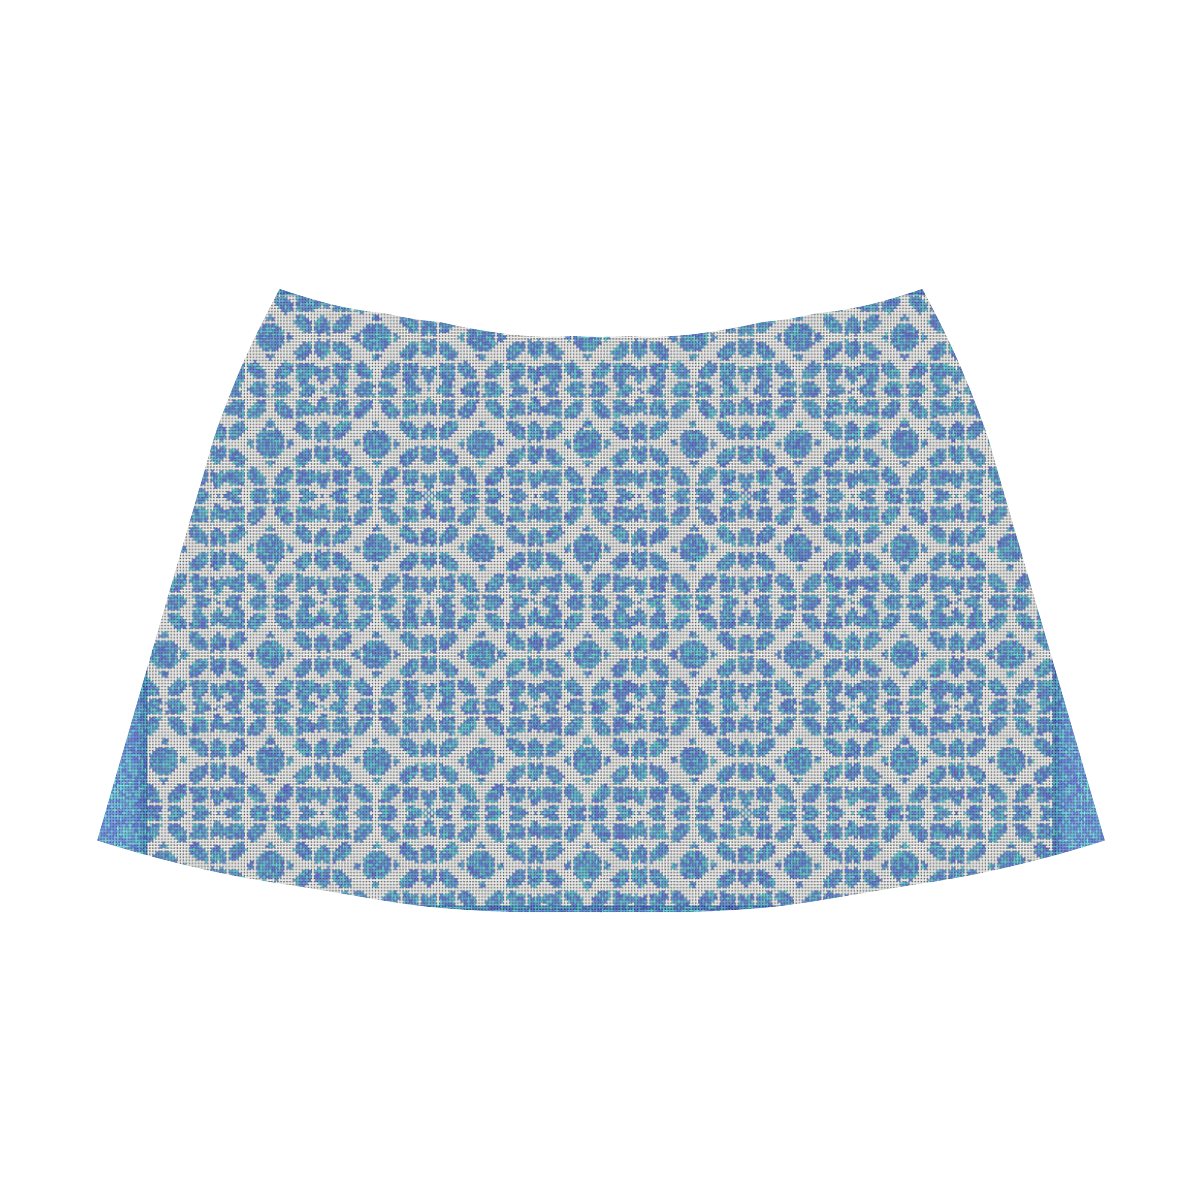 blue and white abstract Mnemosyne Women's Crepe Skirt (Model D16)